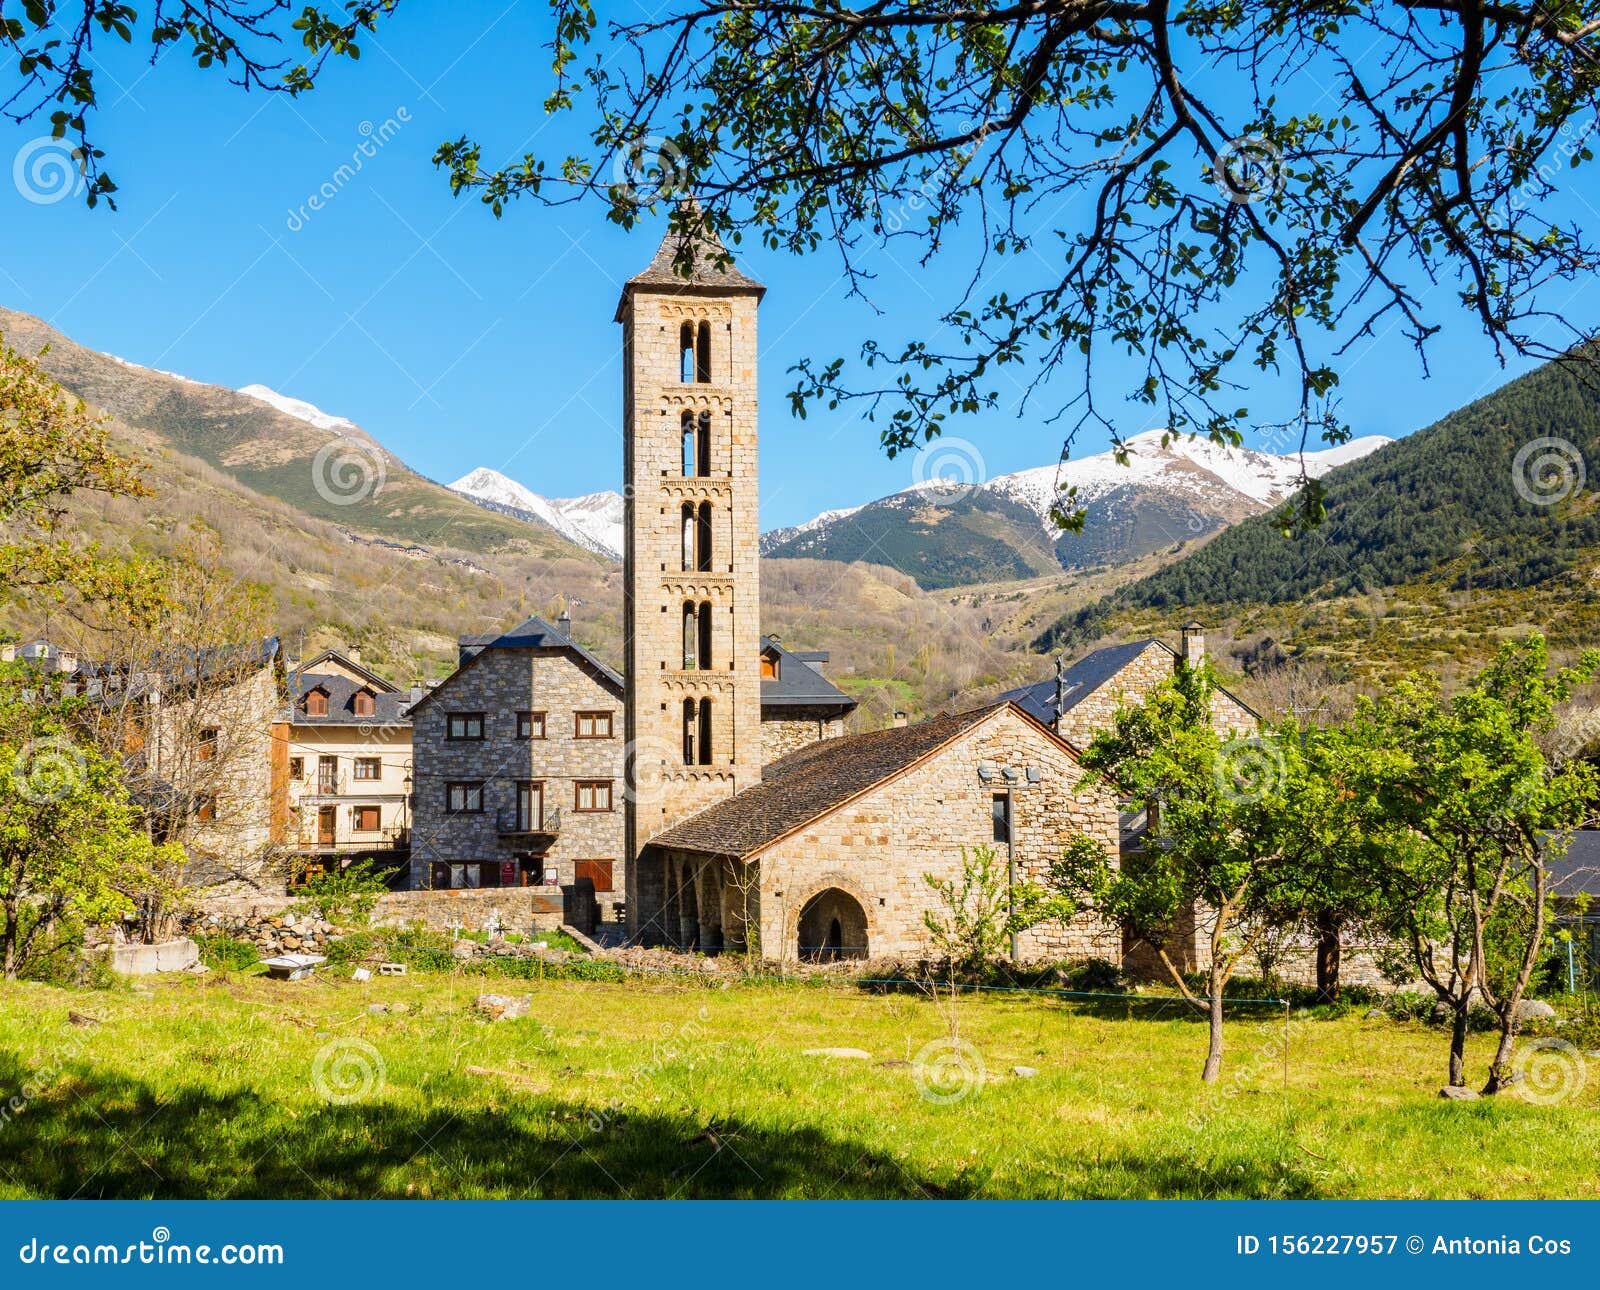 village of erill la vall  in the pyrenees of catalonia, spain